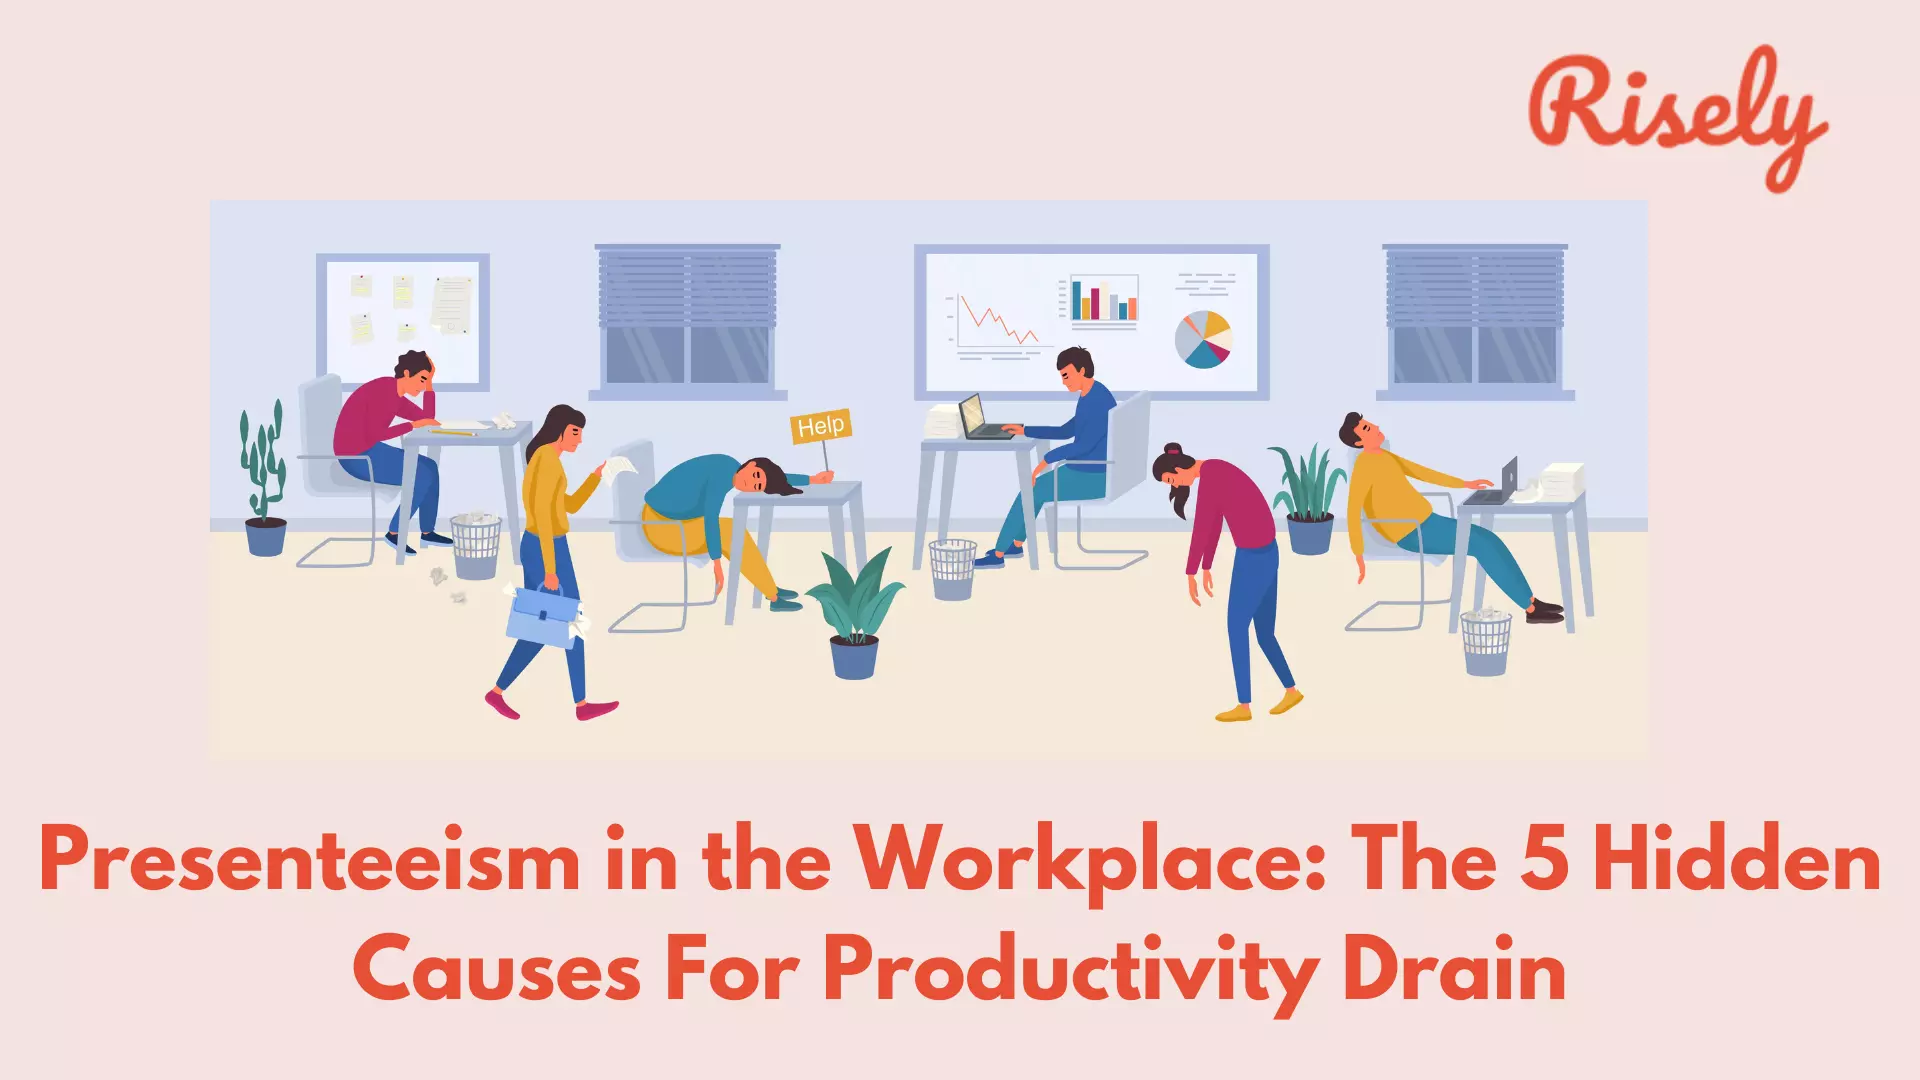 Presenteeism in the Workplace: The 5 Hidden Causes For Productivity Drain